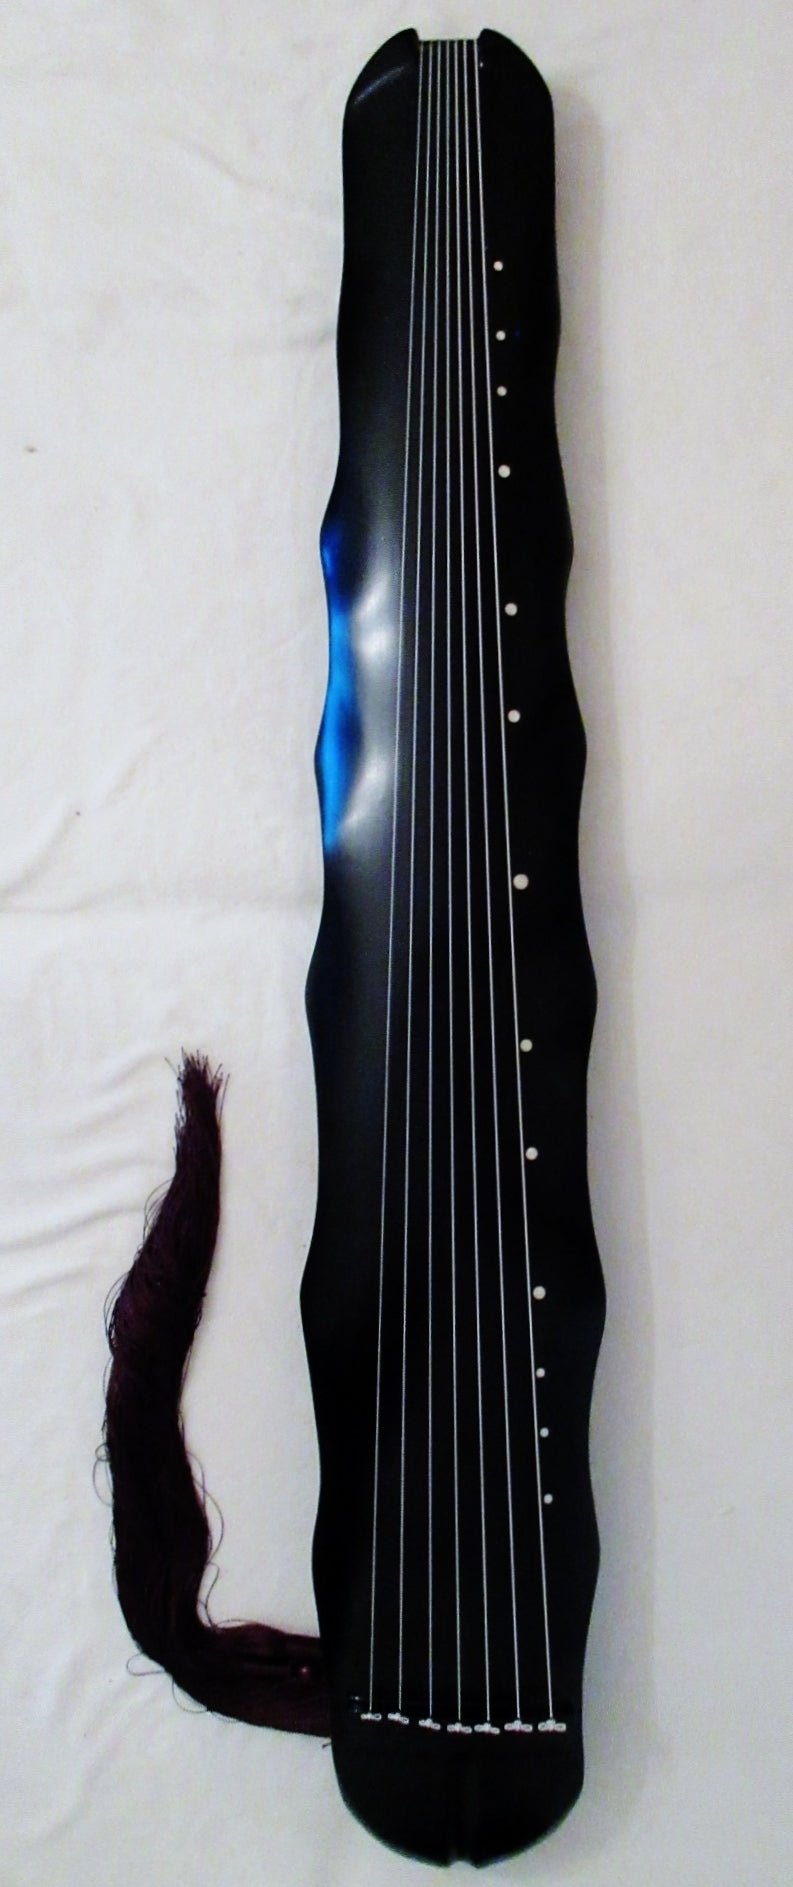 Guqin, Banana Leaf Style, with Guqin bag and tuner. Setup, ready to play 古琴，蕉叶式，送琴囊与调音器